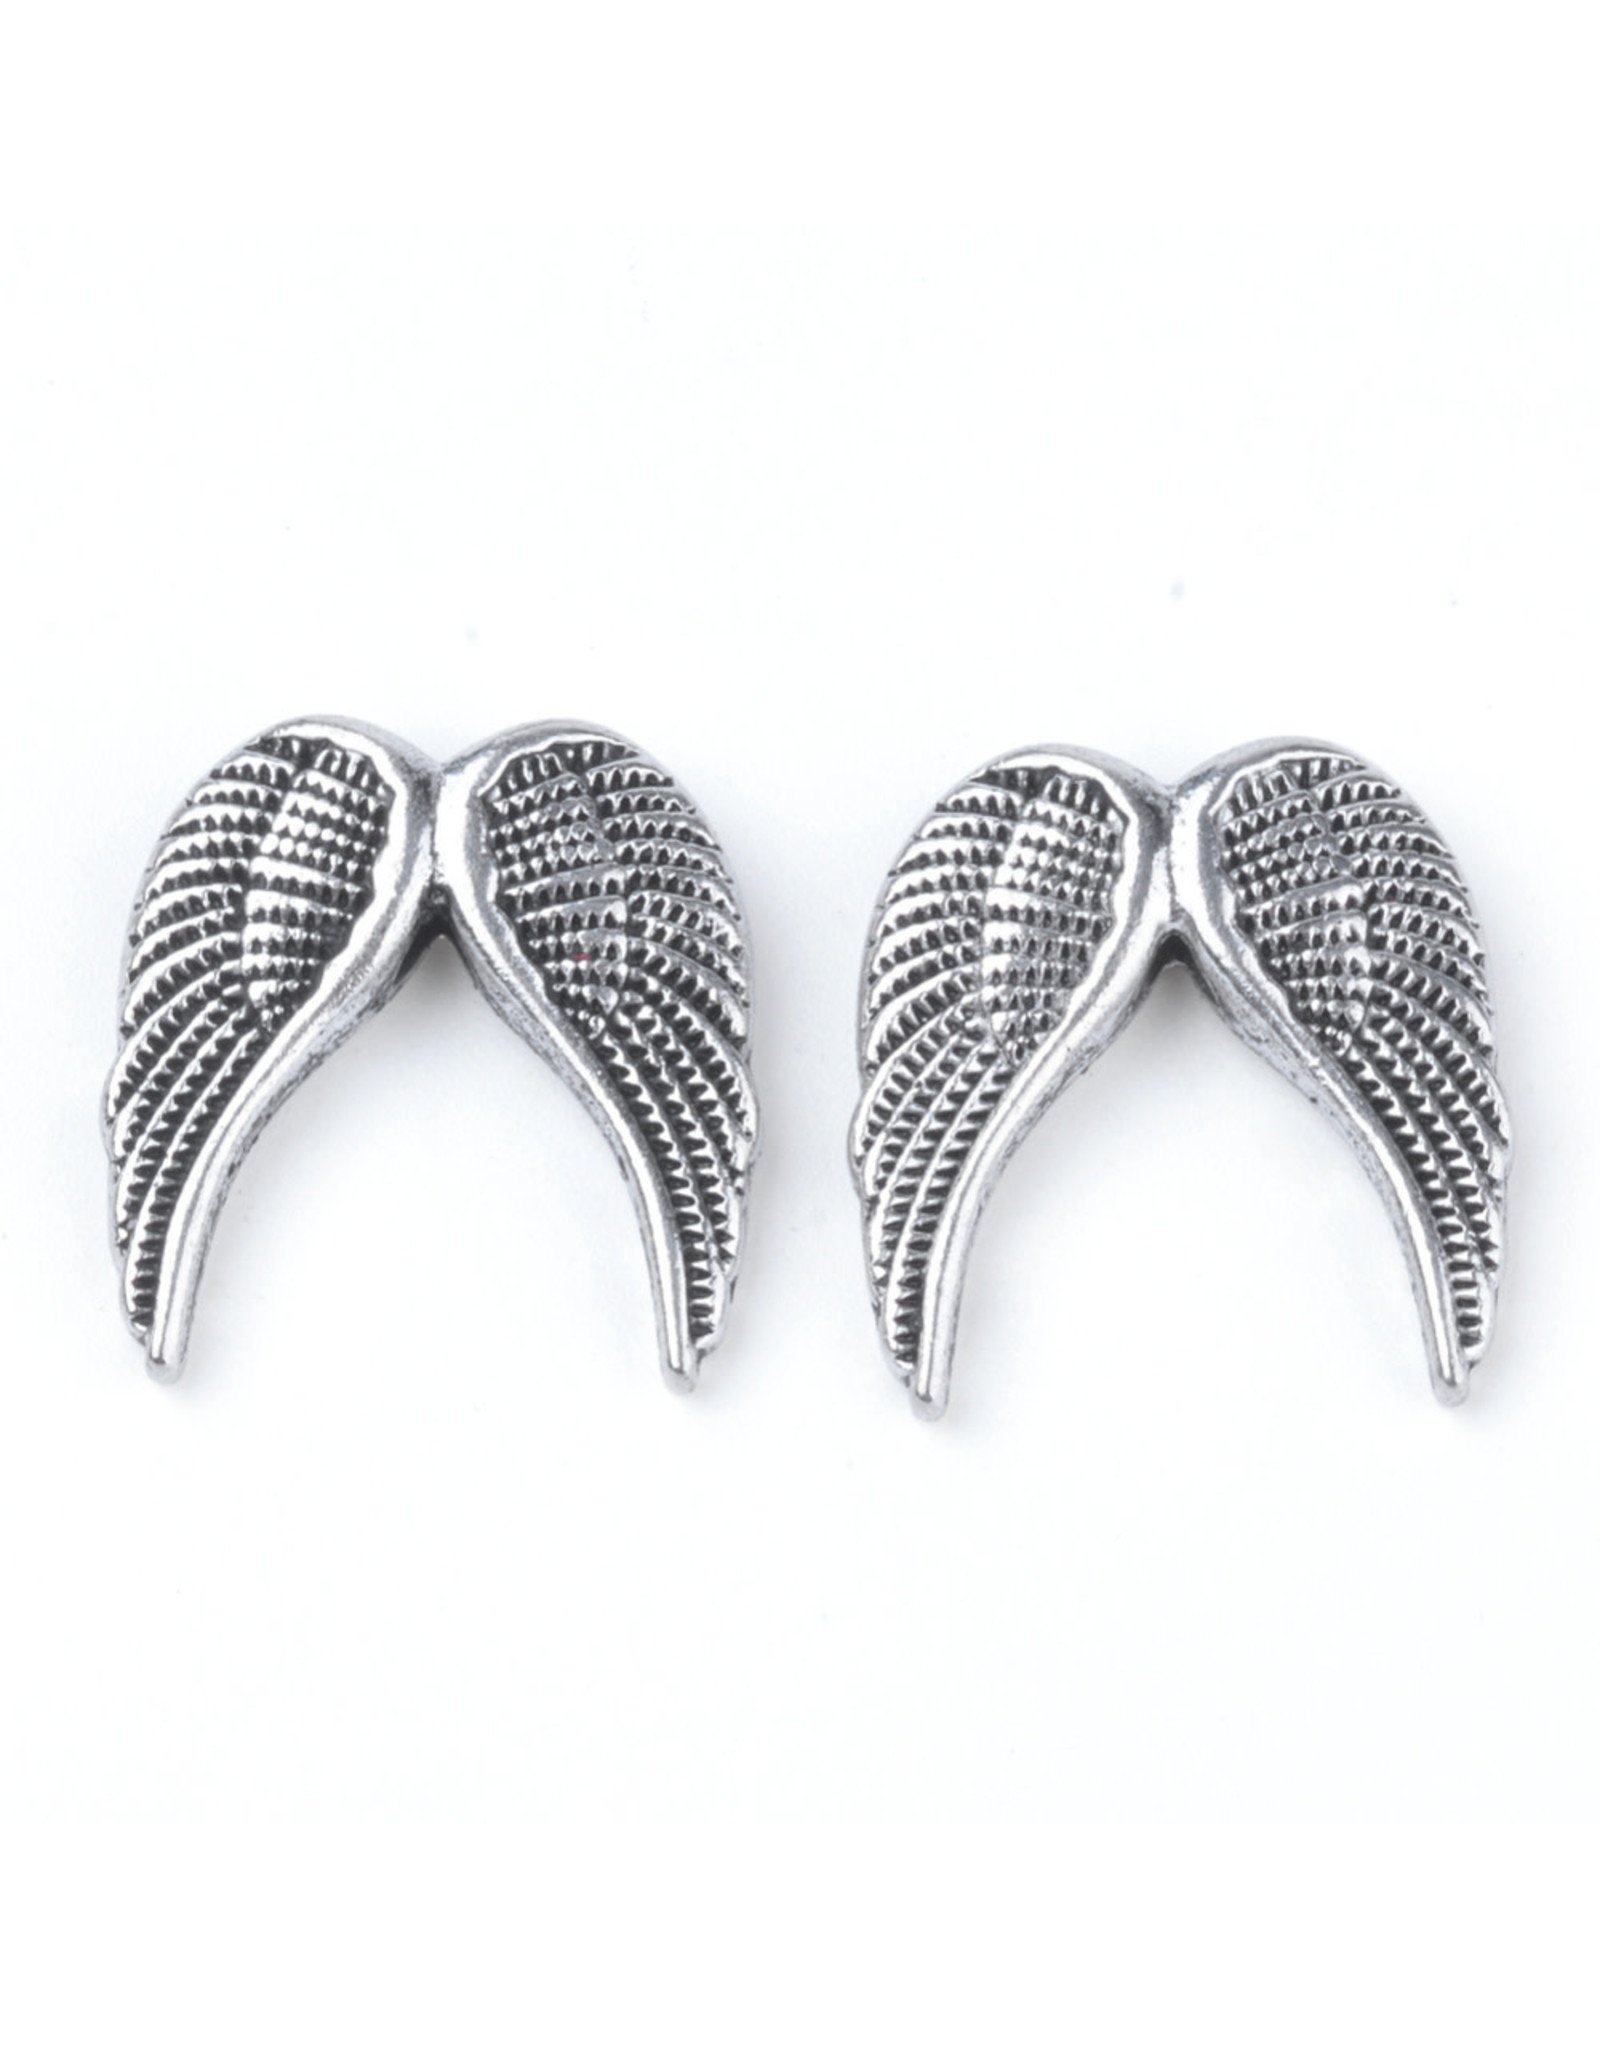 Wing Bead Anitque Silver 19x19mm NF  x1